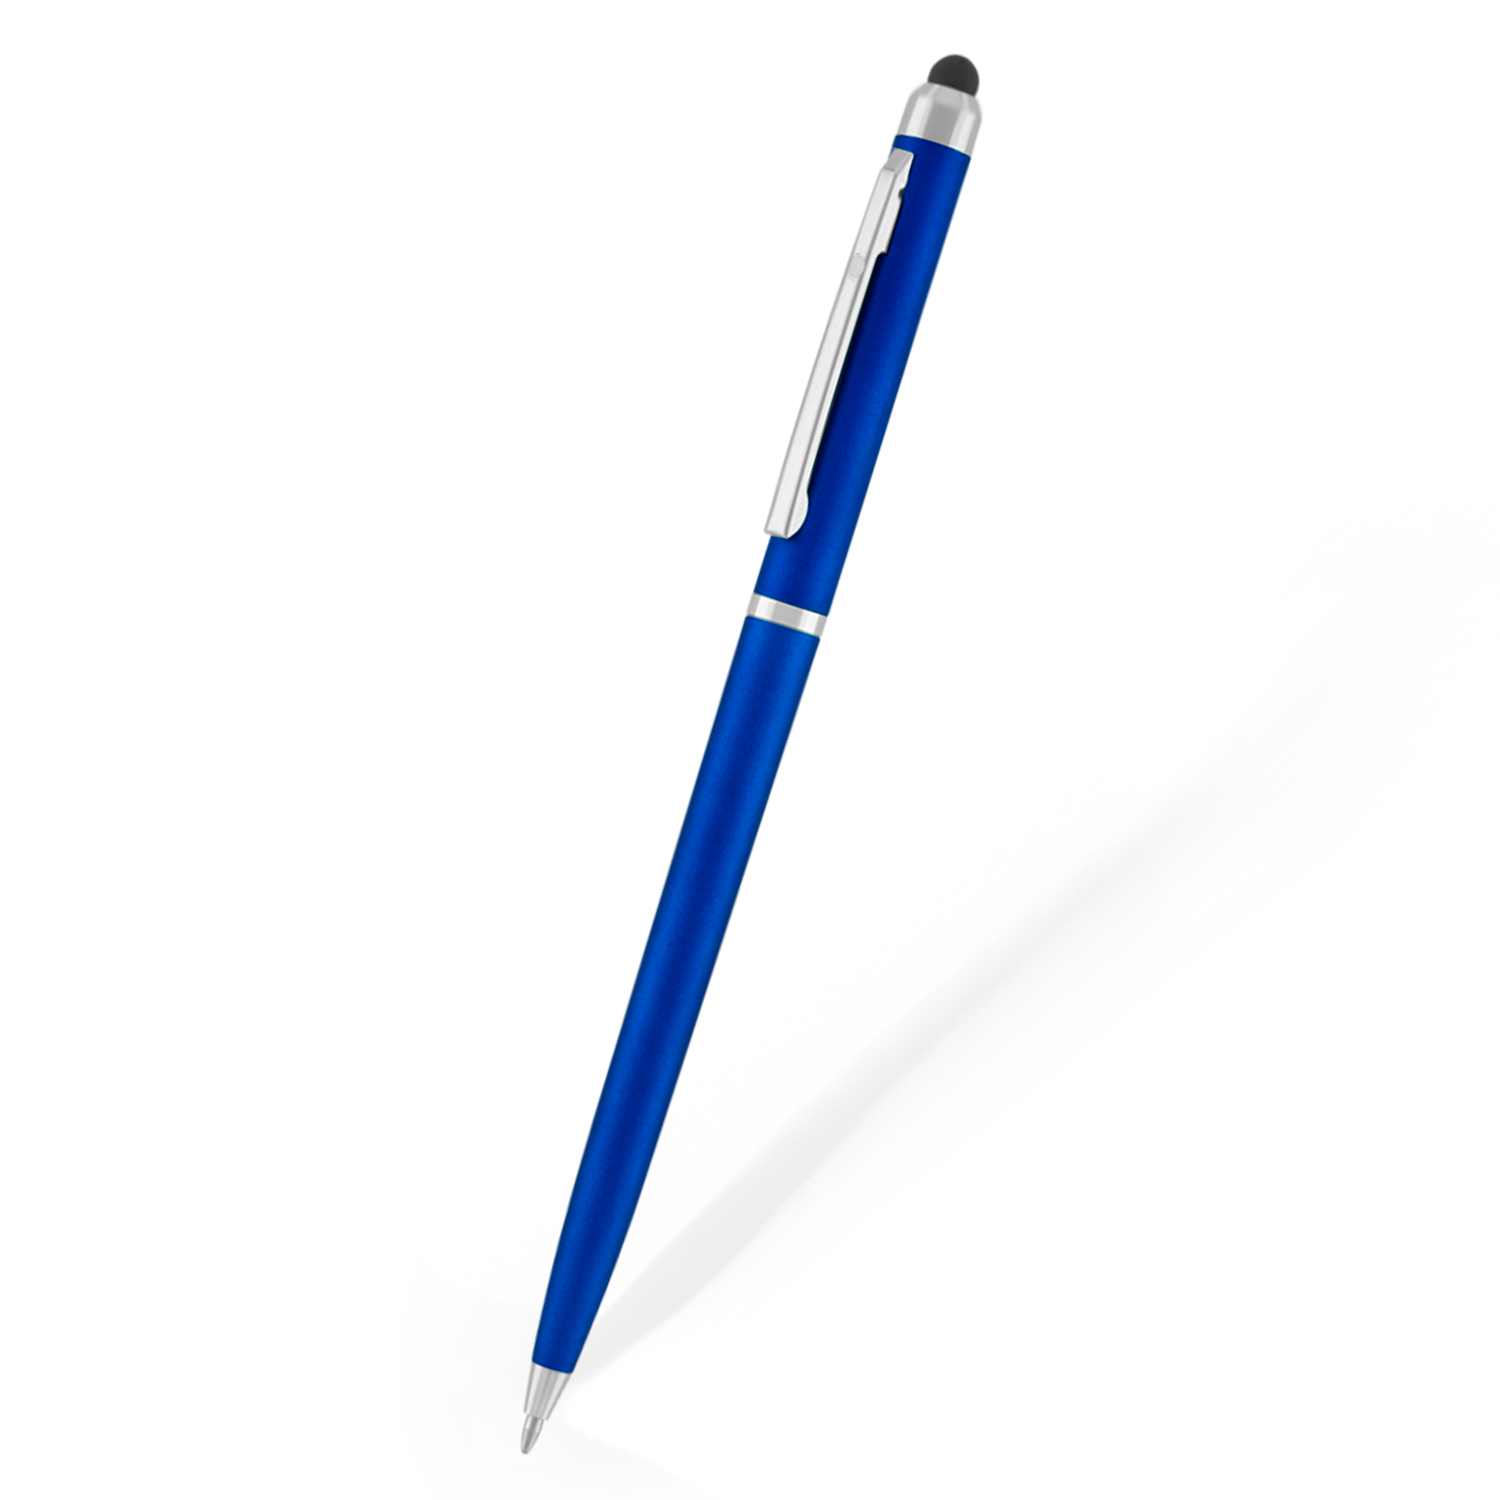 BOLIGRAFO FINE TOUCH AZUL - Cod 5410 - NOBOBIZ, Promotional Items, Material, Products